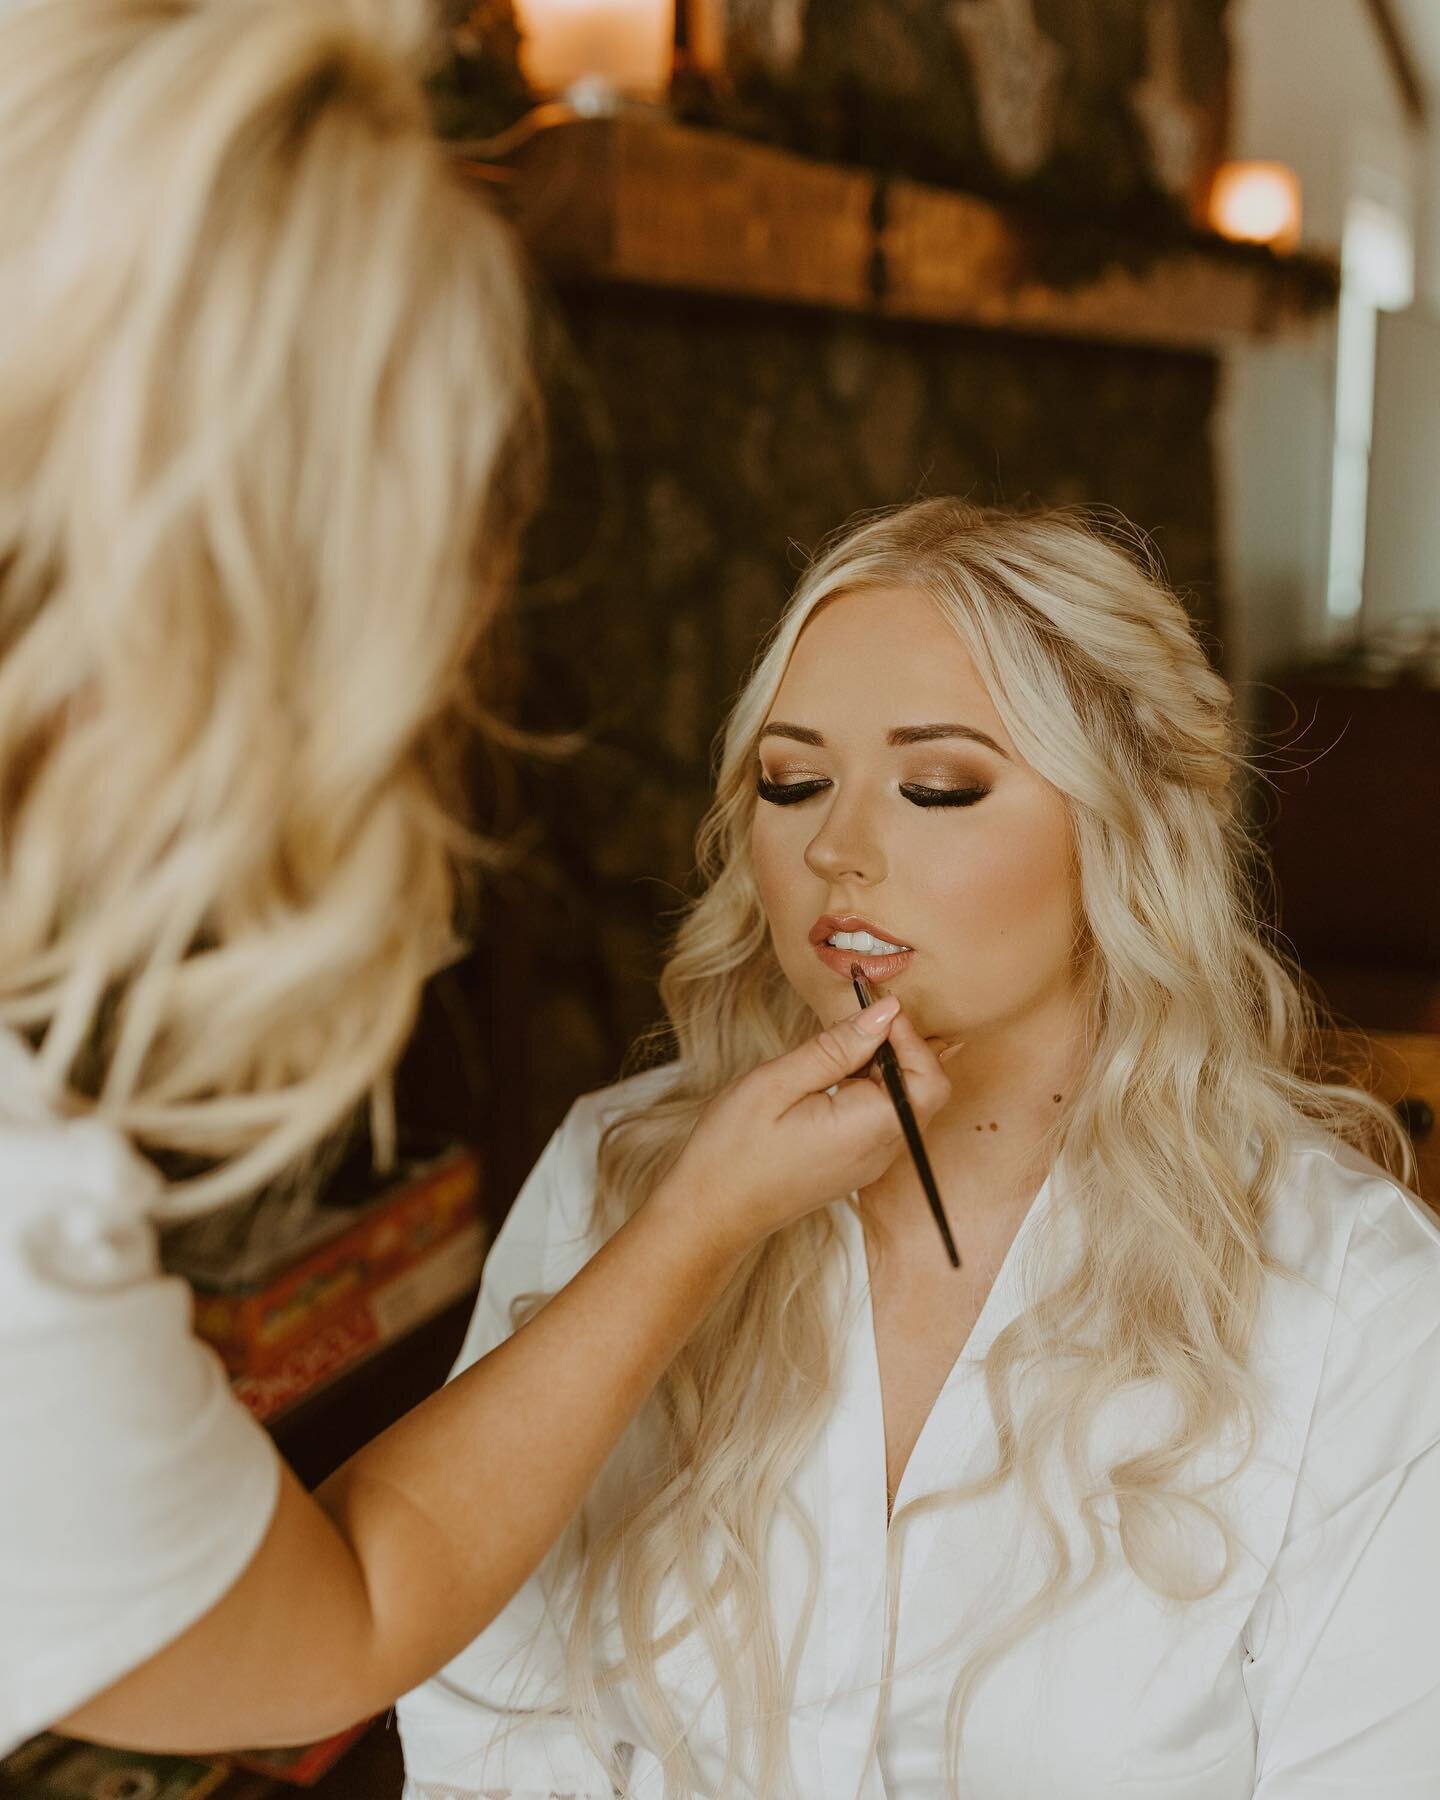 We have 77 weddings booked so far this year and inquiries coming in daily!Words can not explain how ready we are to celebrate you and your love! Are you ready?! Ahhh!!!✨
Our beautiful bride @brianna.skogan 
📷 @mariah.h.photography